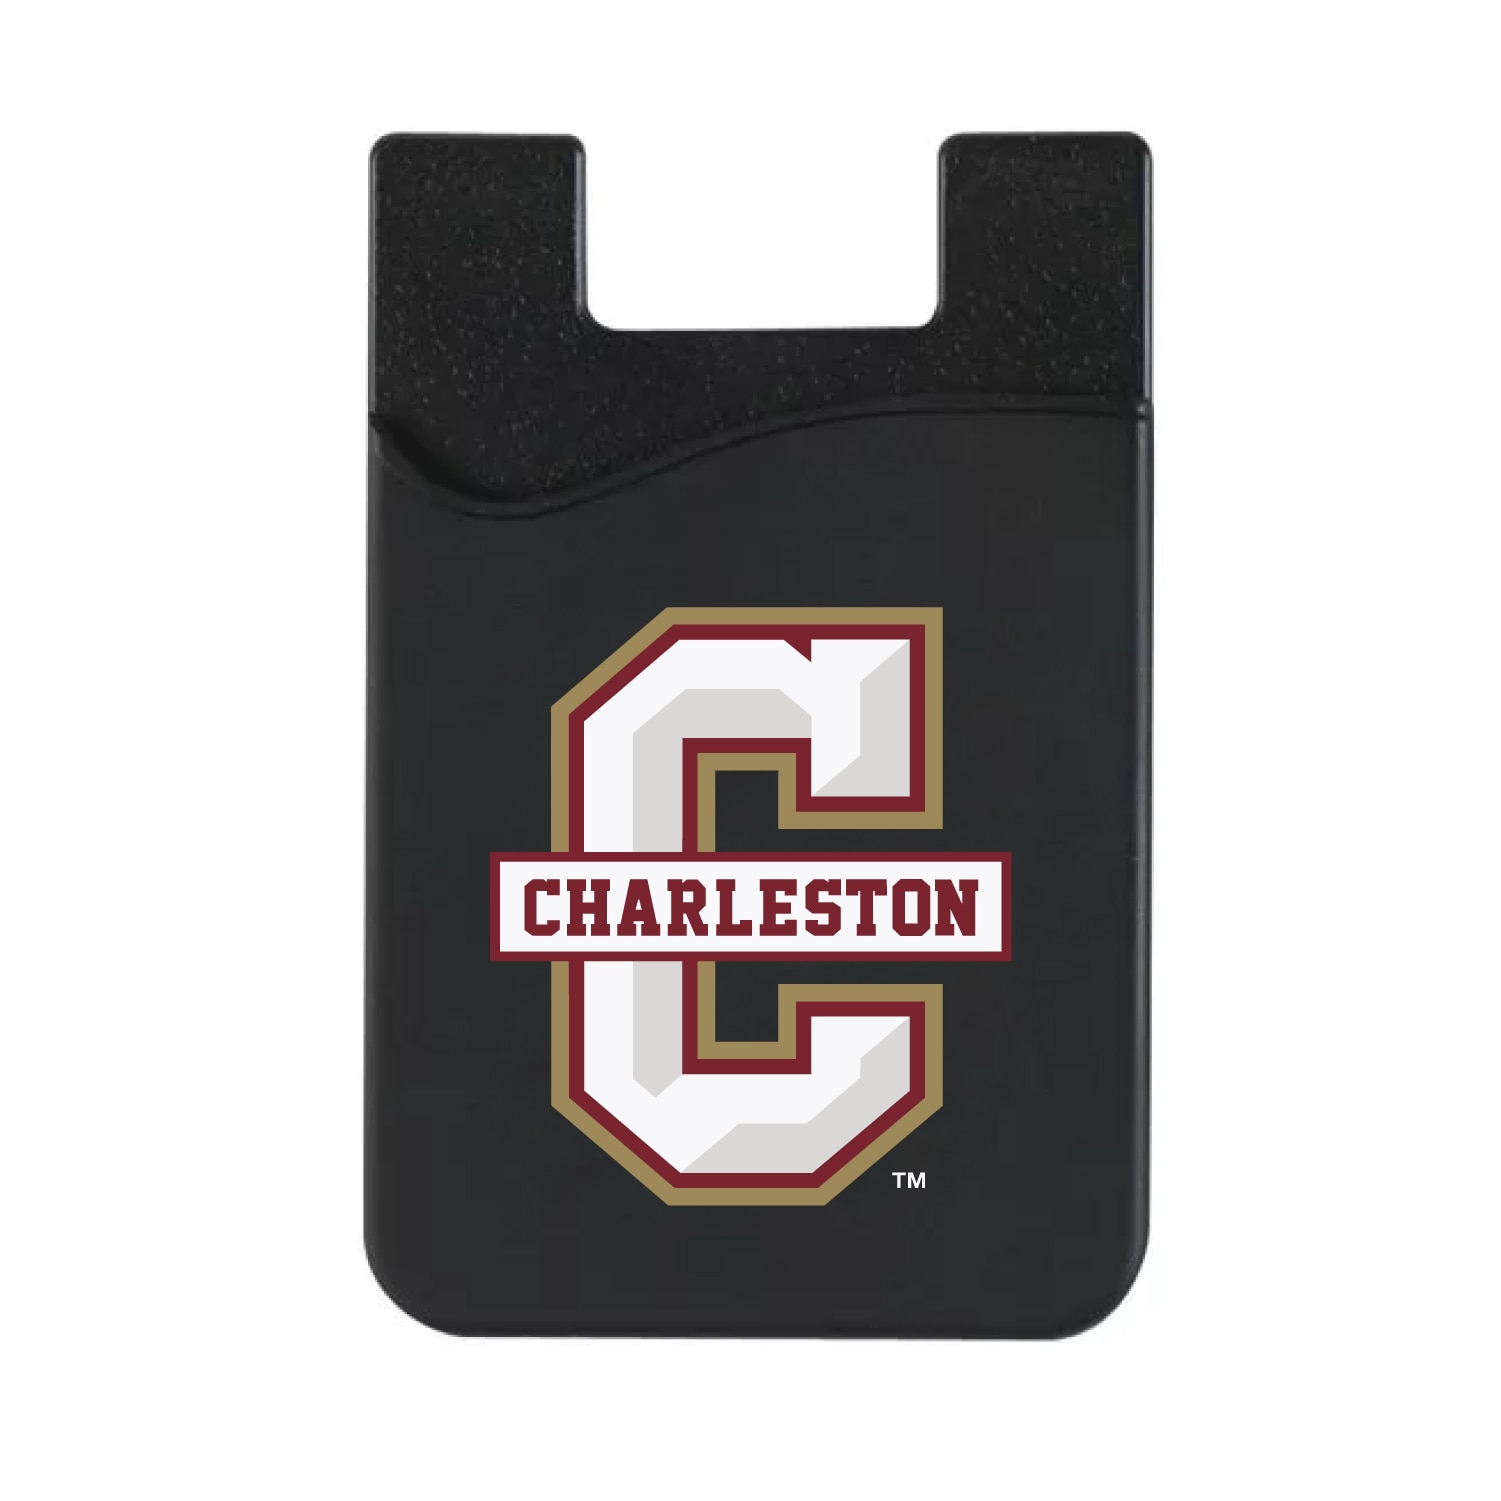 College of Charleston - Black Leather Wallet Sleeve (Top Load), Classic V1